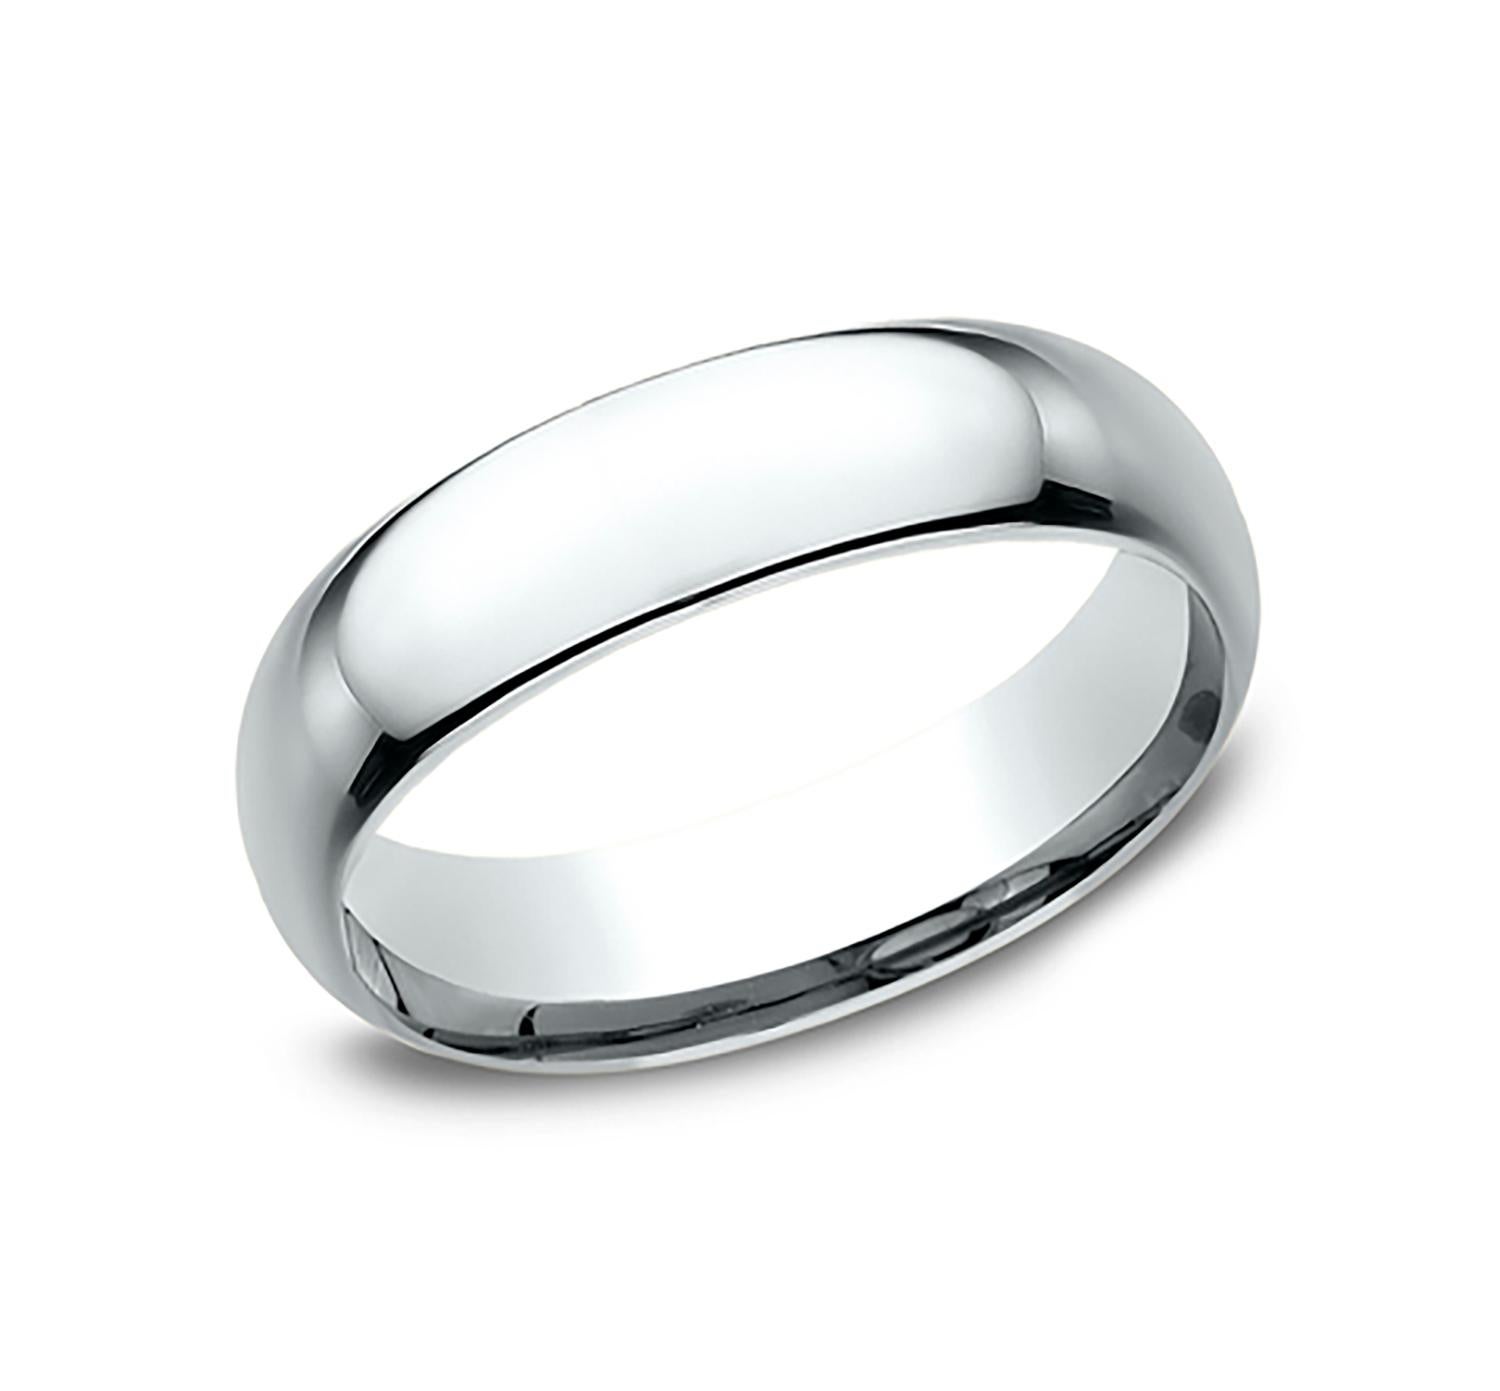 Benchmark wedding band in polished platinum finish. Width 6mm, high dome comfort fit. Custom engraving and finishing available. Size 10 US and resizable upon request. Available in 1/4, 1/2, and 3/4 sizes, for more information please message us on